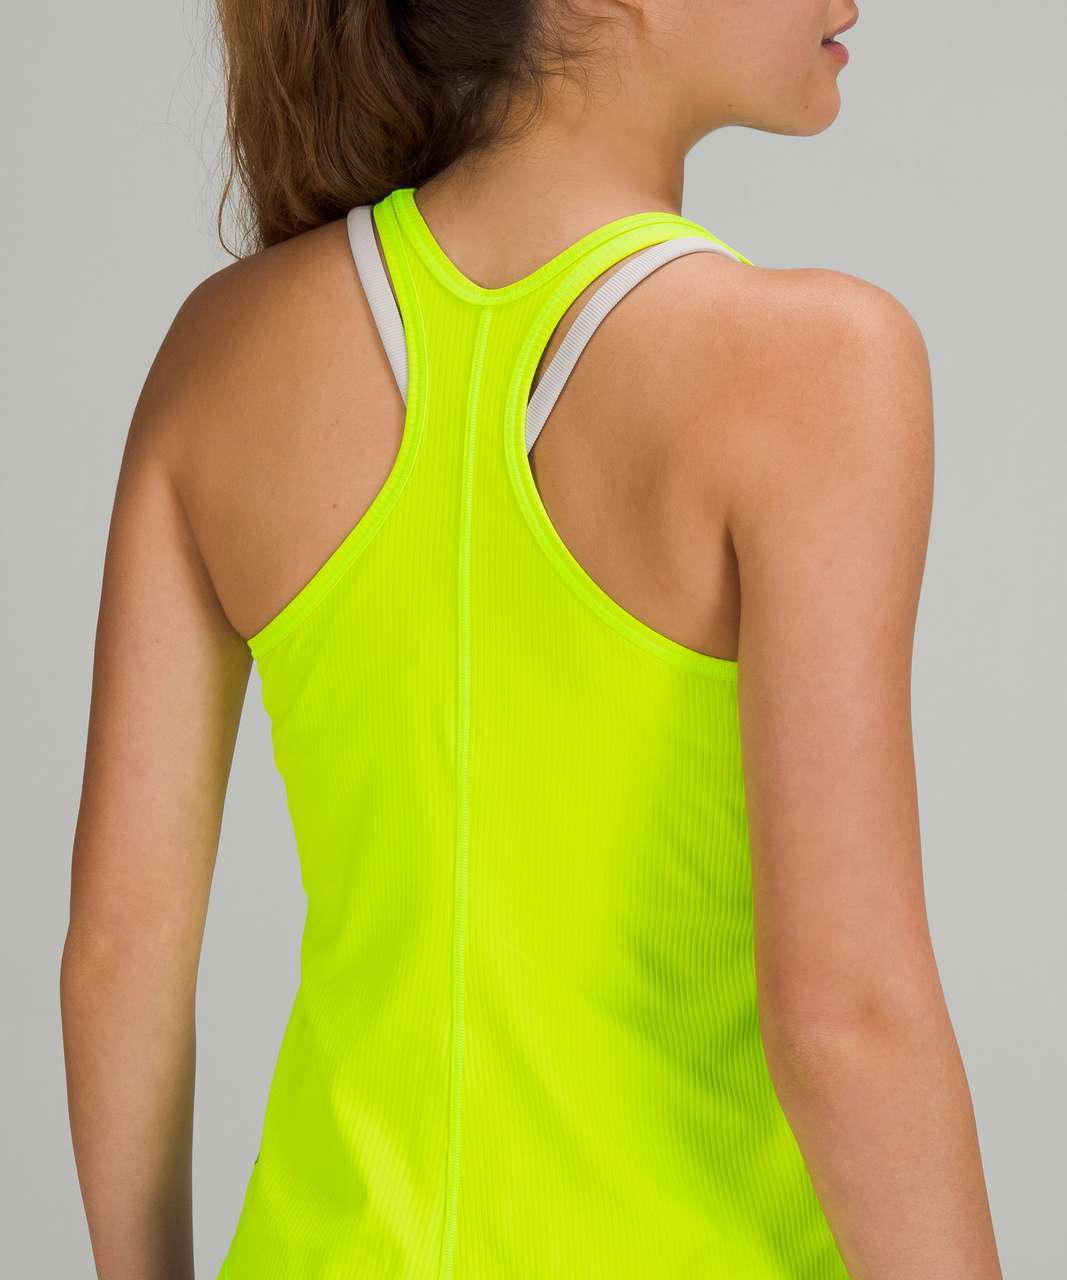 Lululemon Base Pace Ribbed Tank Top - Highlight Yellow